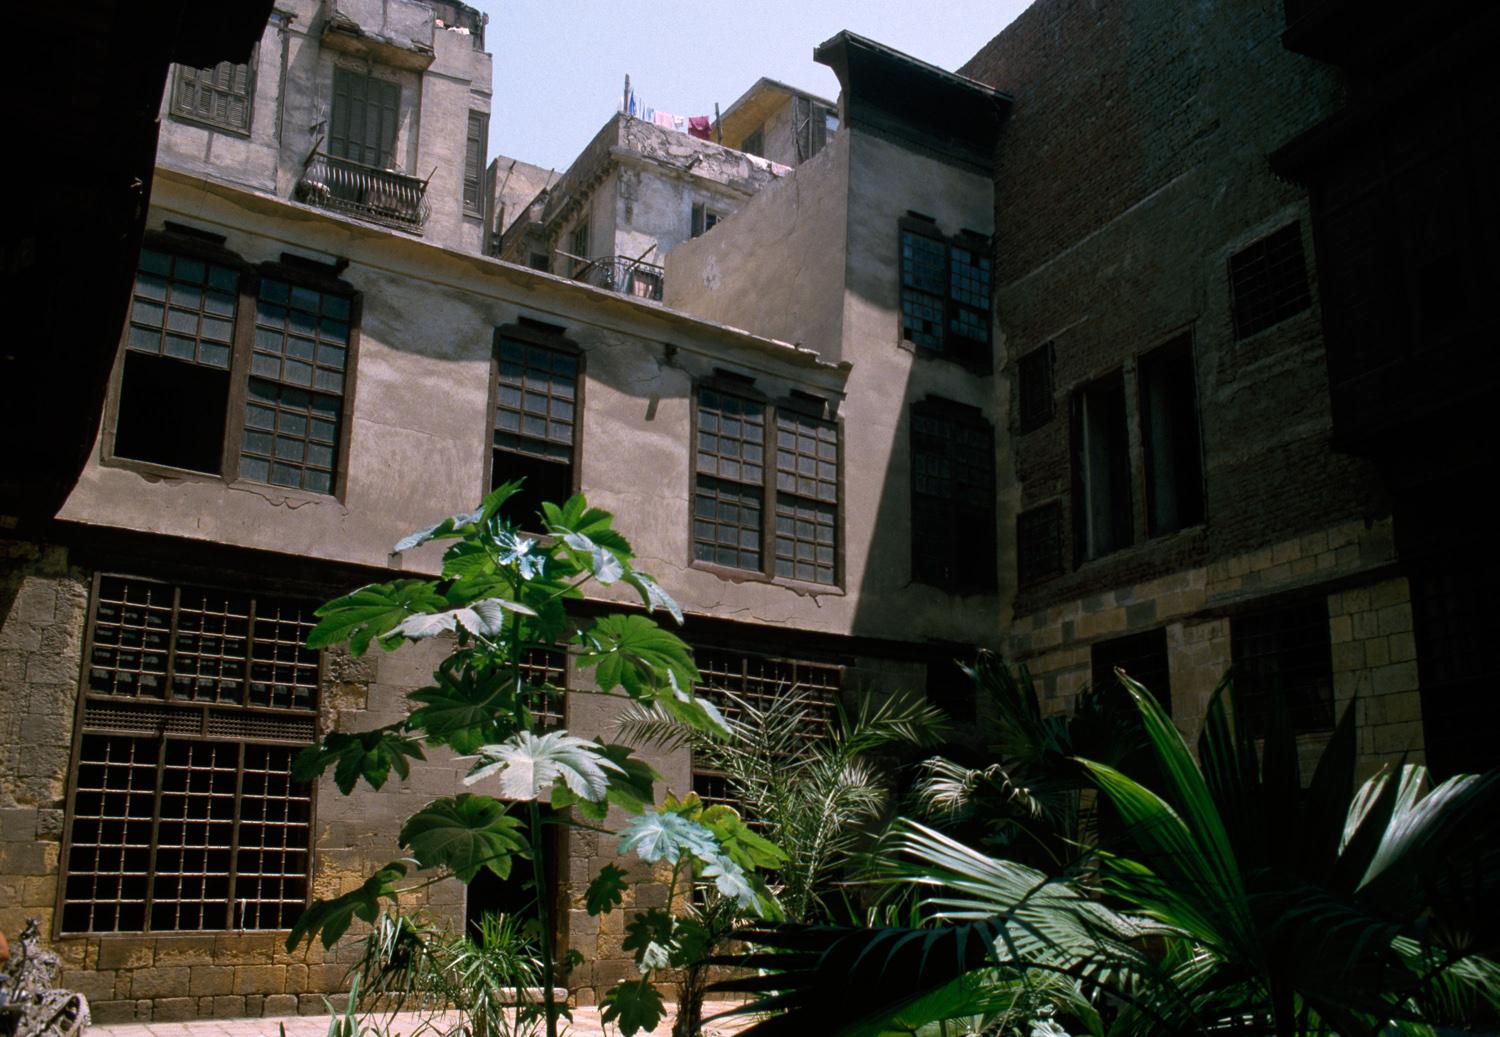 View of courtyard with main reception hall (qa'a) in background